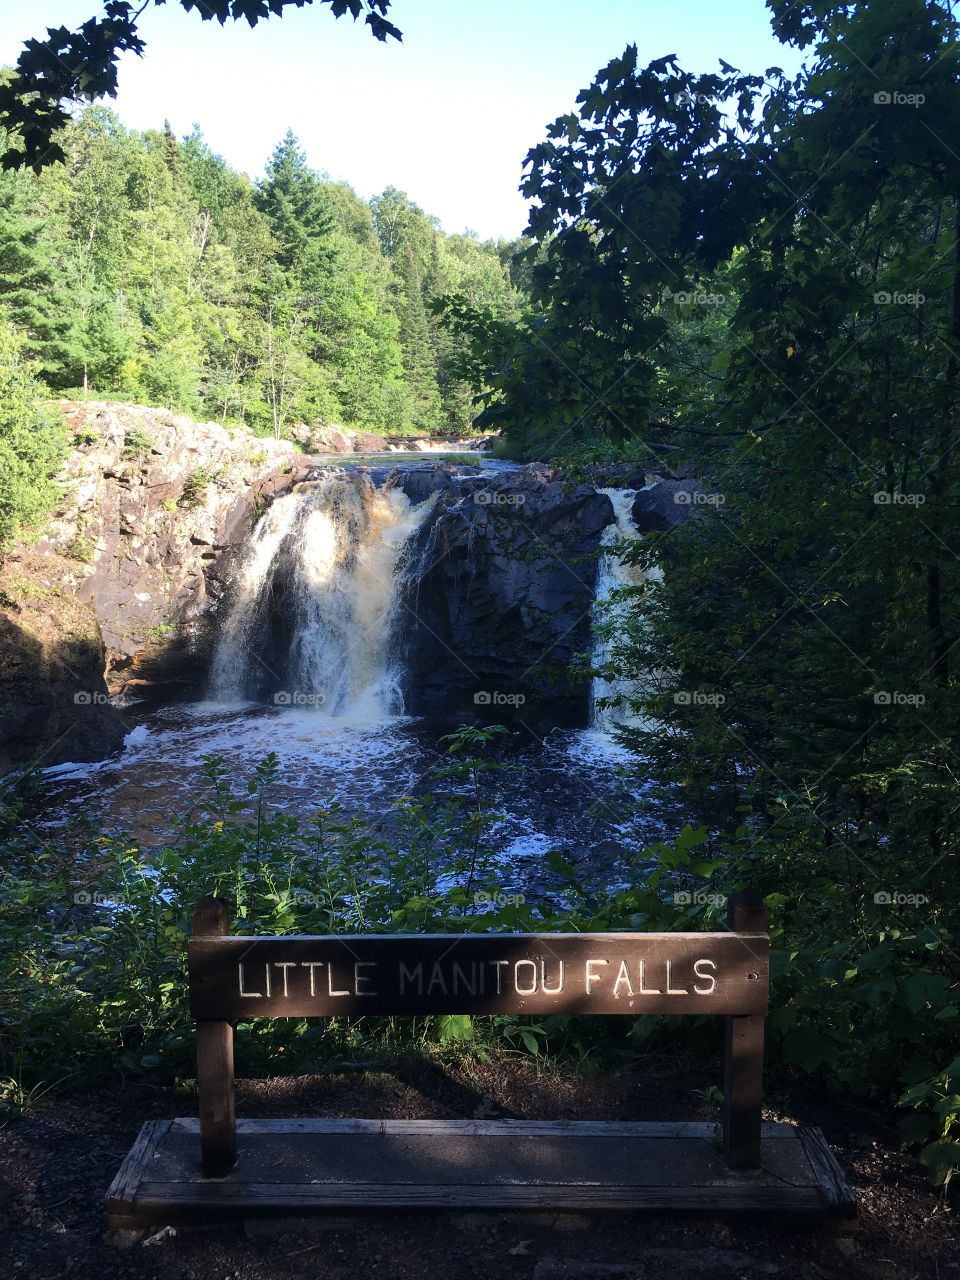 The Little Manitou Falls in Pattison State Park in Wisconsin